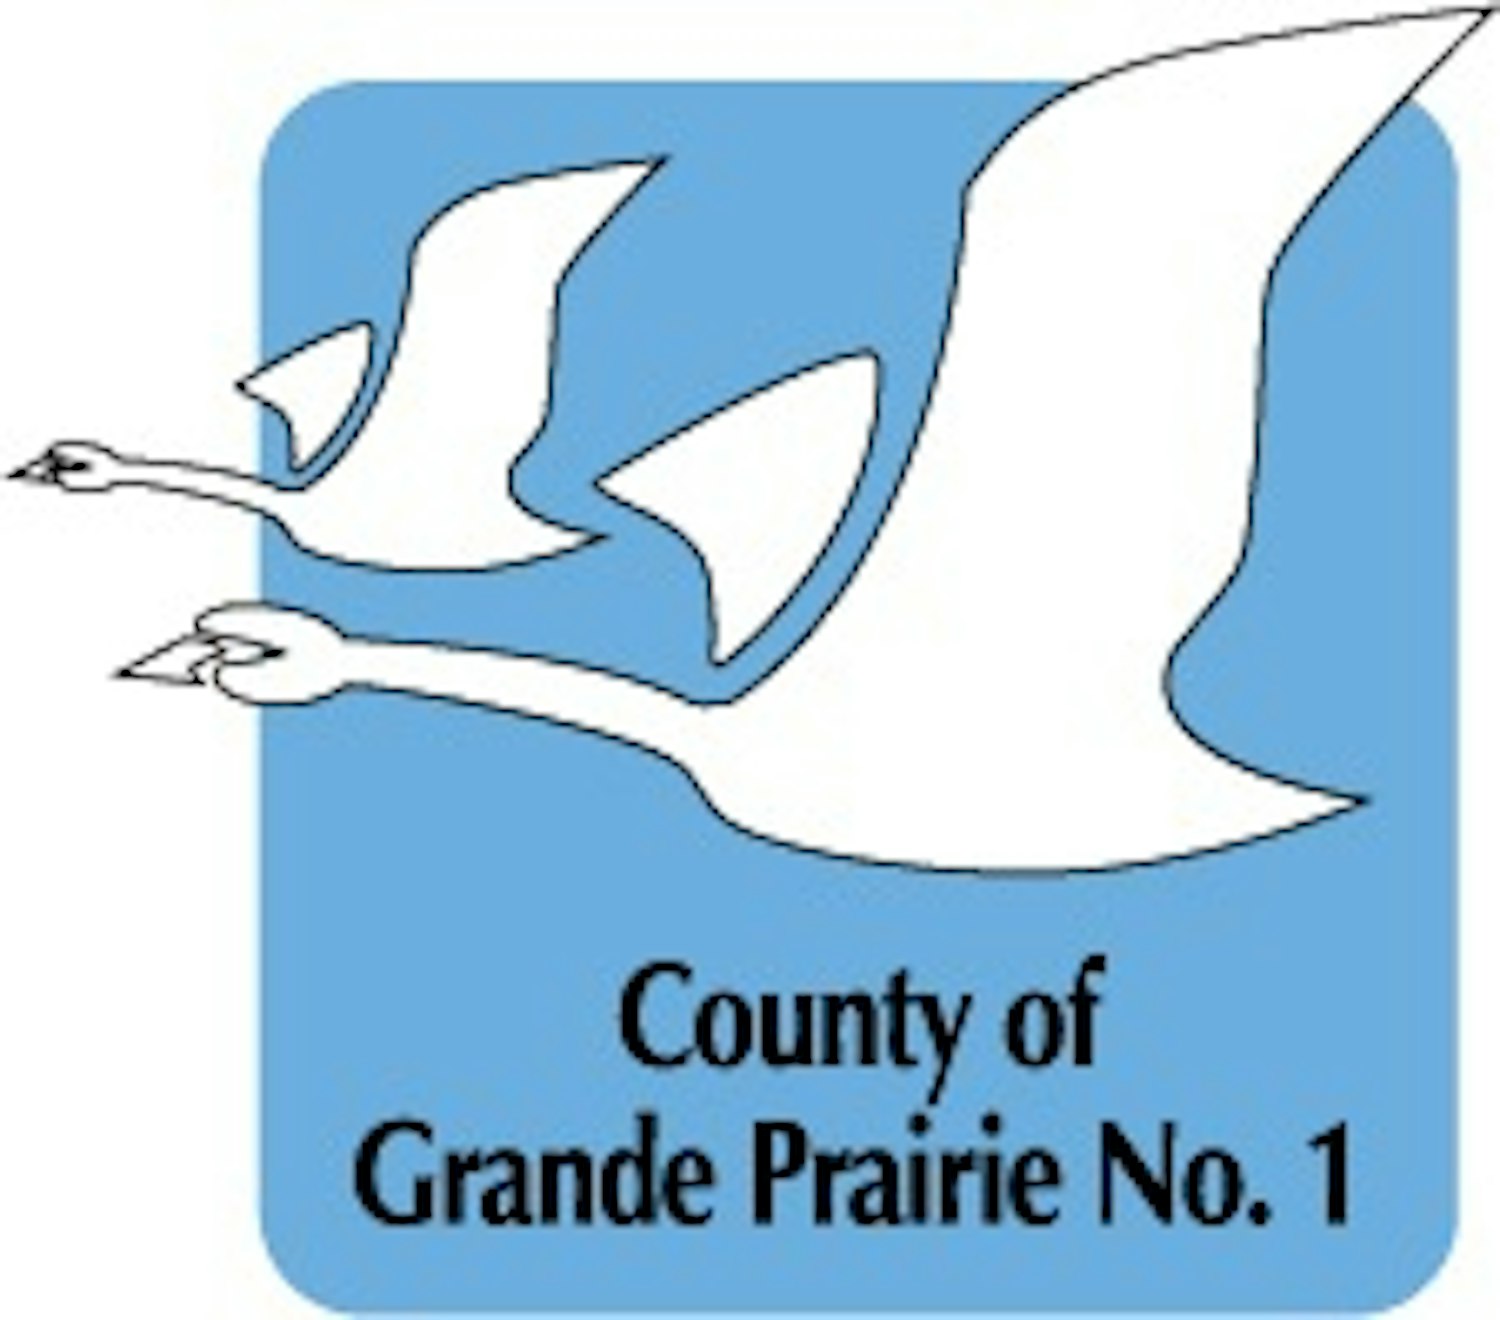 Engage the County of Grande Prairie